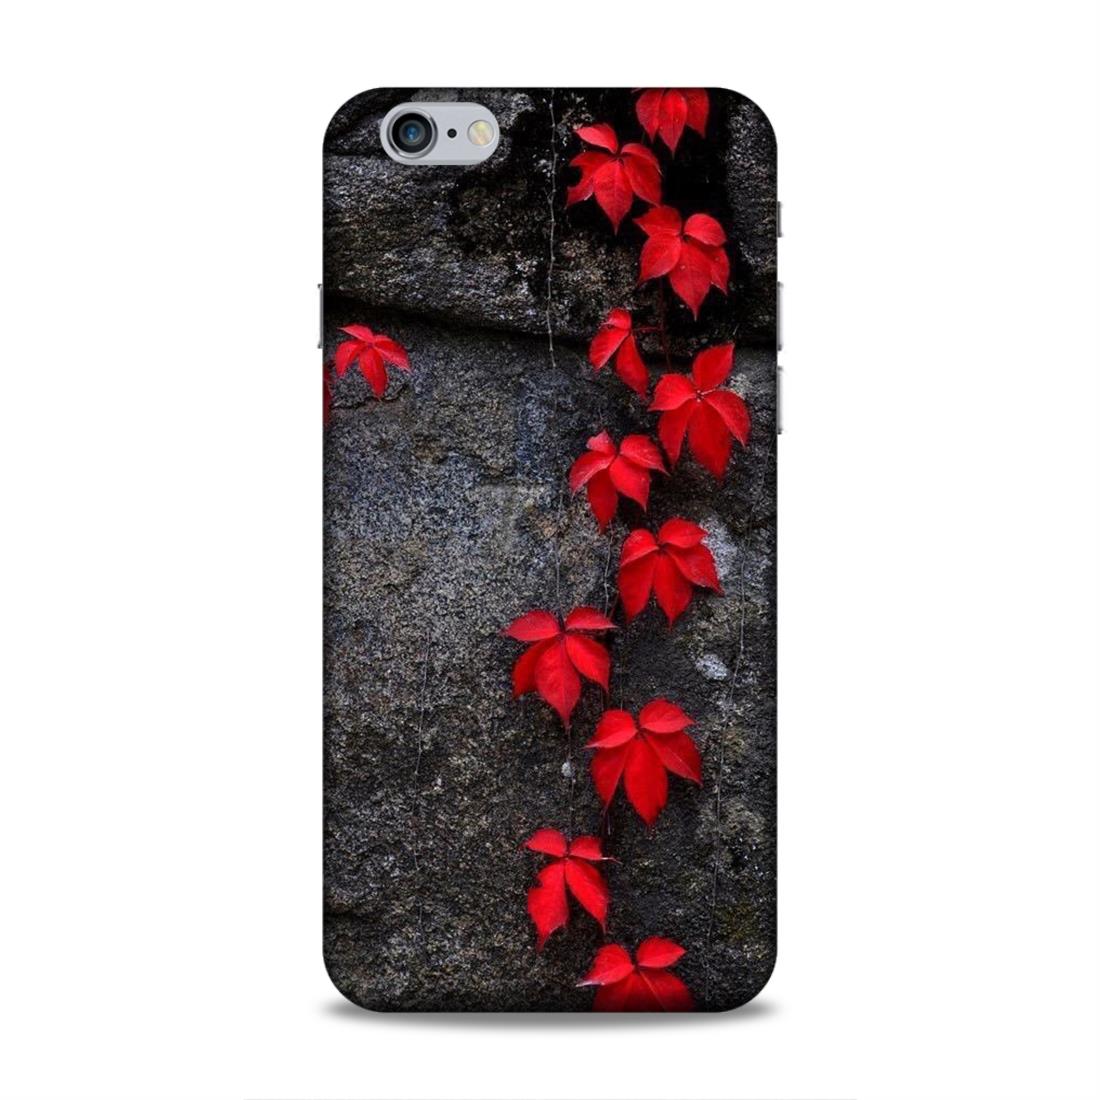 Red Leaf Series Hard Back Case For Apple iPhone 6 Plus / 6s Plus